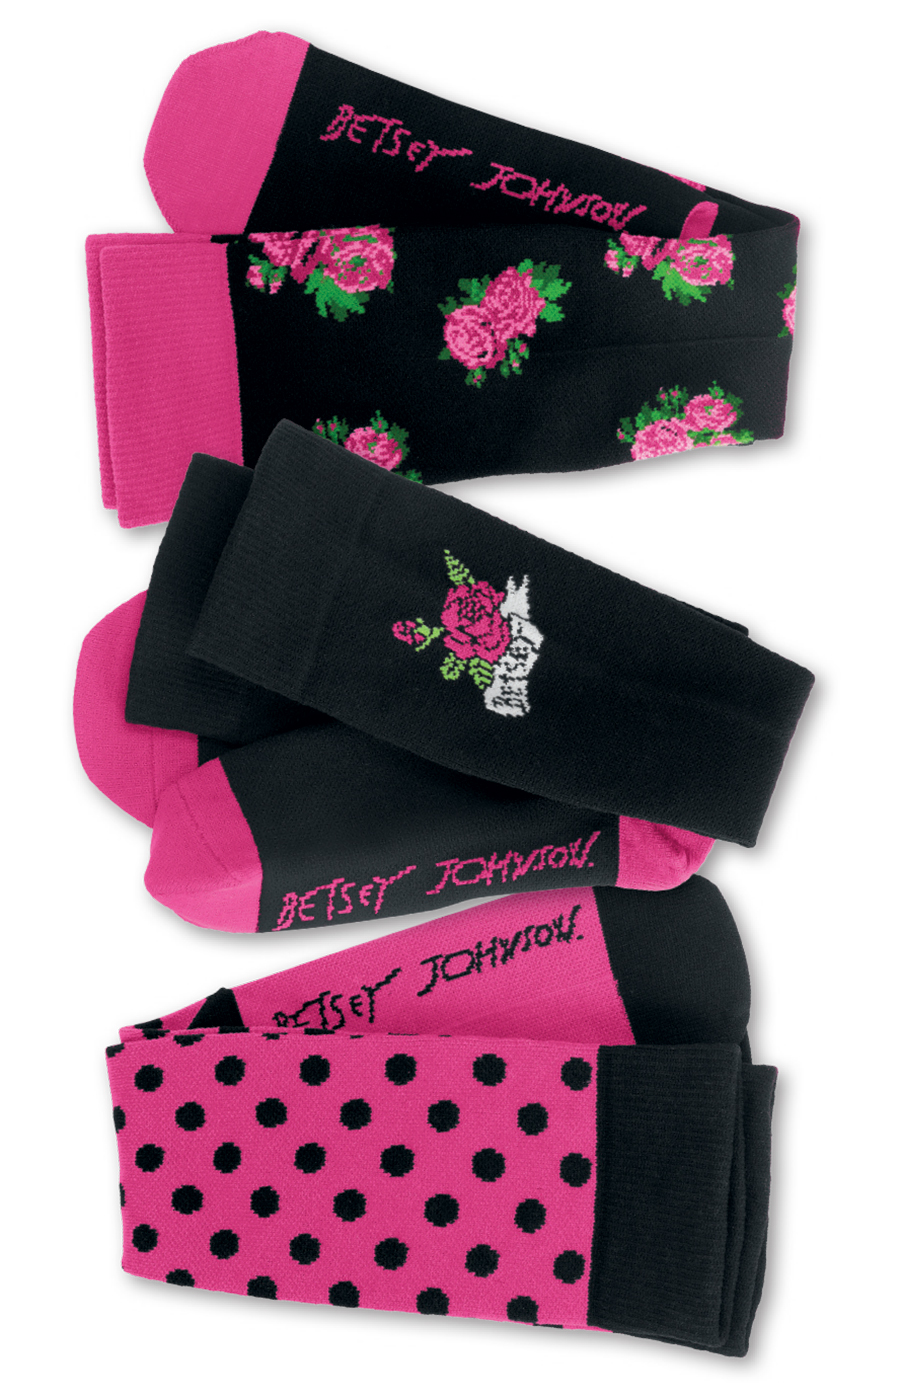 NEW - Betsey Johnson Collection for Koi